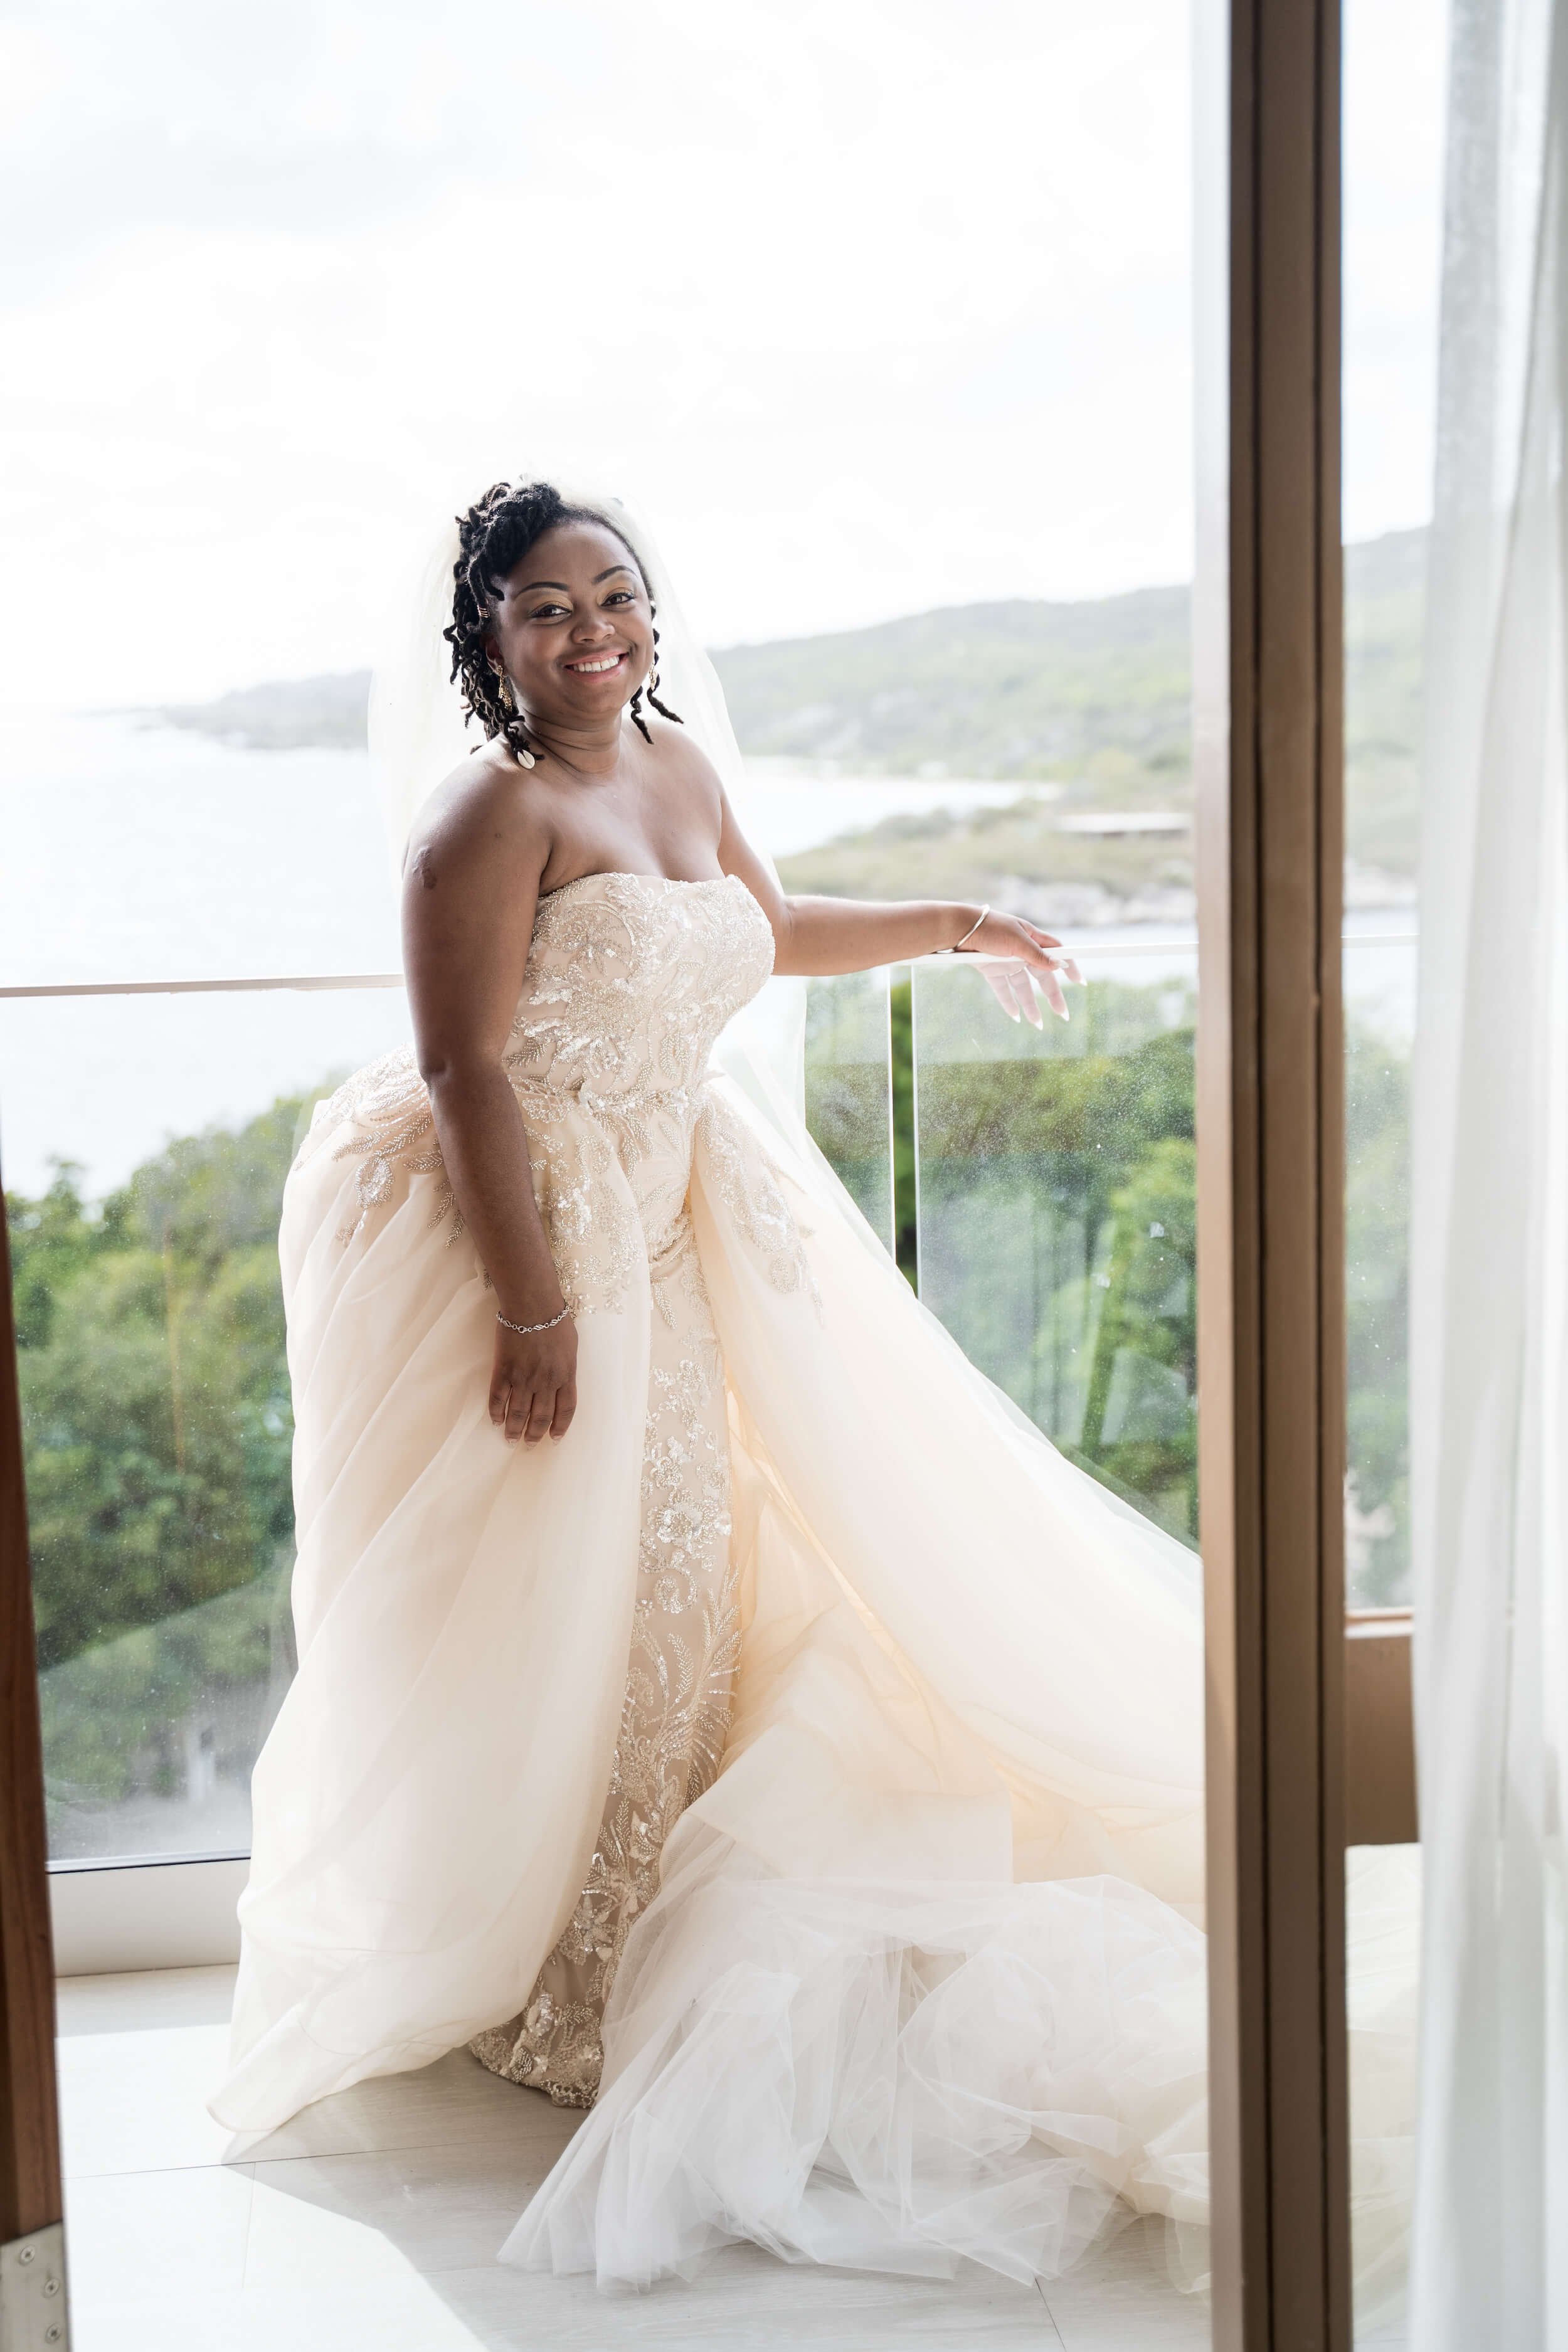 brittany-how-to-plan-a-destination-wedding-in-willemstad-curacao-dreams-curacao-resort-review-black-destination-bride-desti-tv-desti-guide-to-destination-weddings-natural-hair-locs-allure-gown2022.jpg